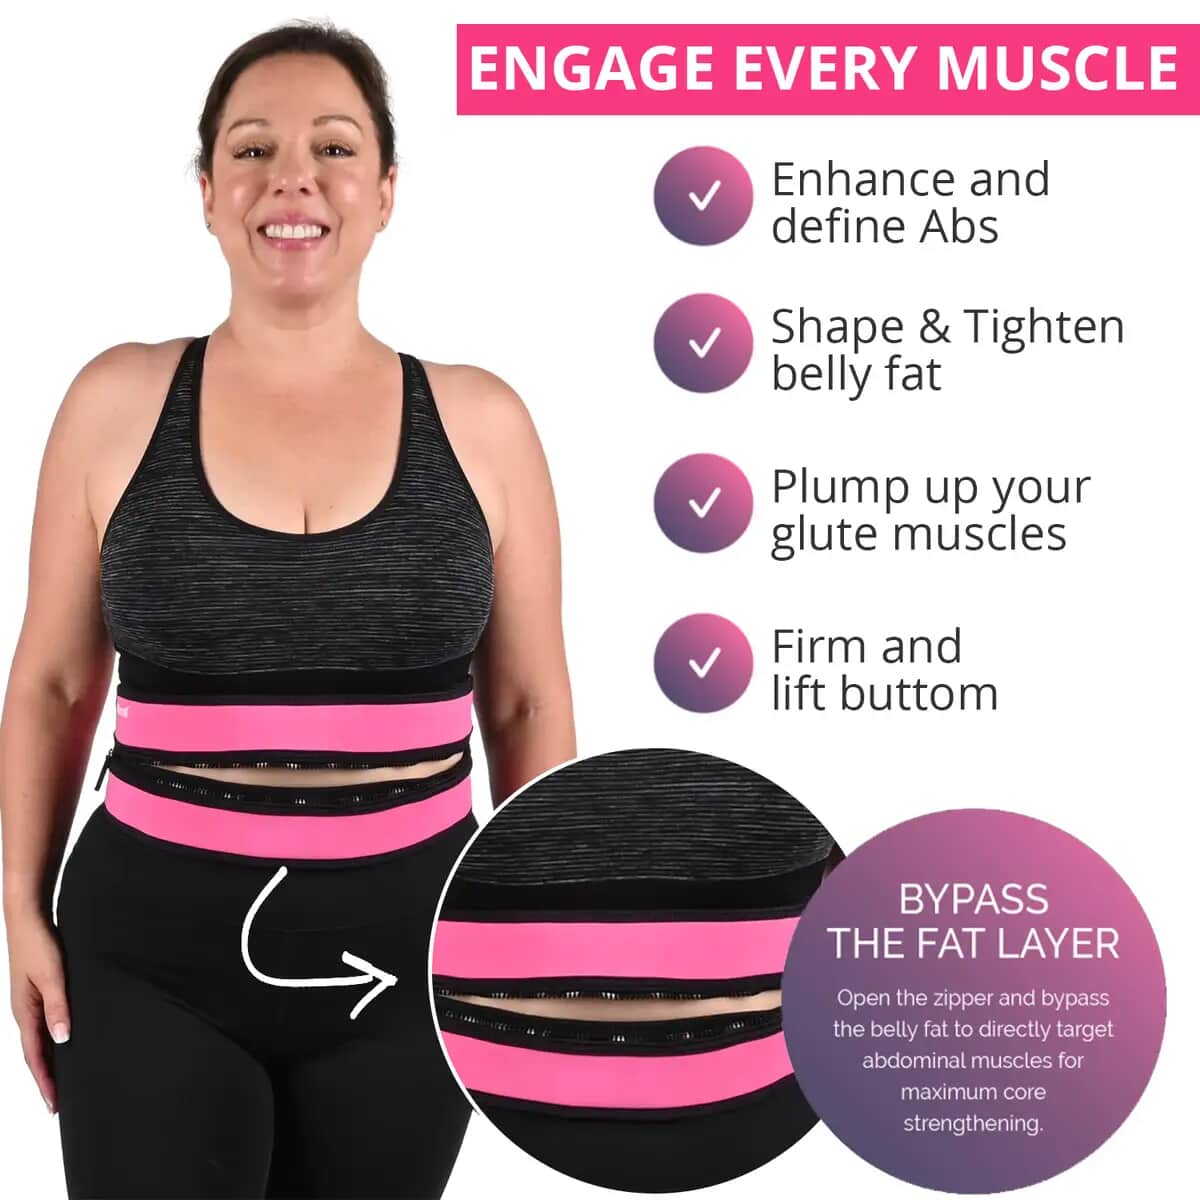 EVERTONE Zip & Tone Womens Belt to Lift and Firm Abs and Butt , Toning Slimming Belt , Weight Loss Belt , Waist Trimmer Belt image number 3